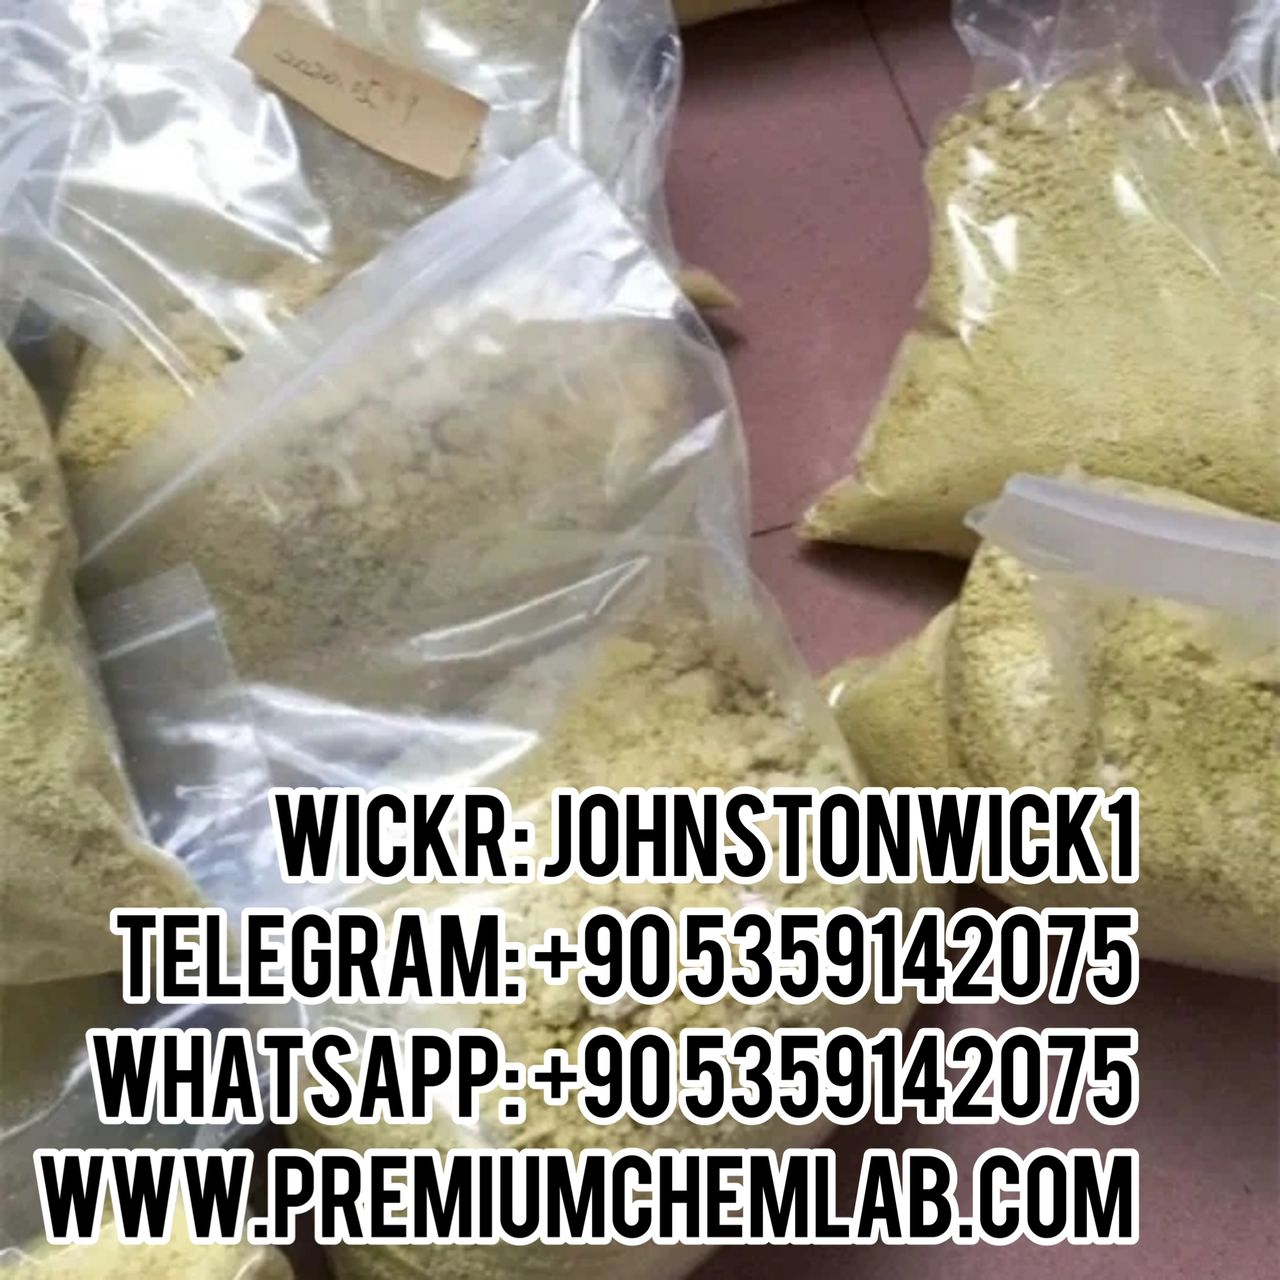 Sgt78 For Sale, ADBB For Sale, 6CL-ADBA For Sale, 4Fbica For Sale, - photo